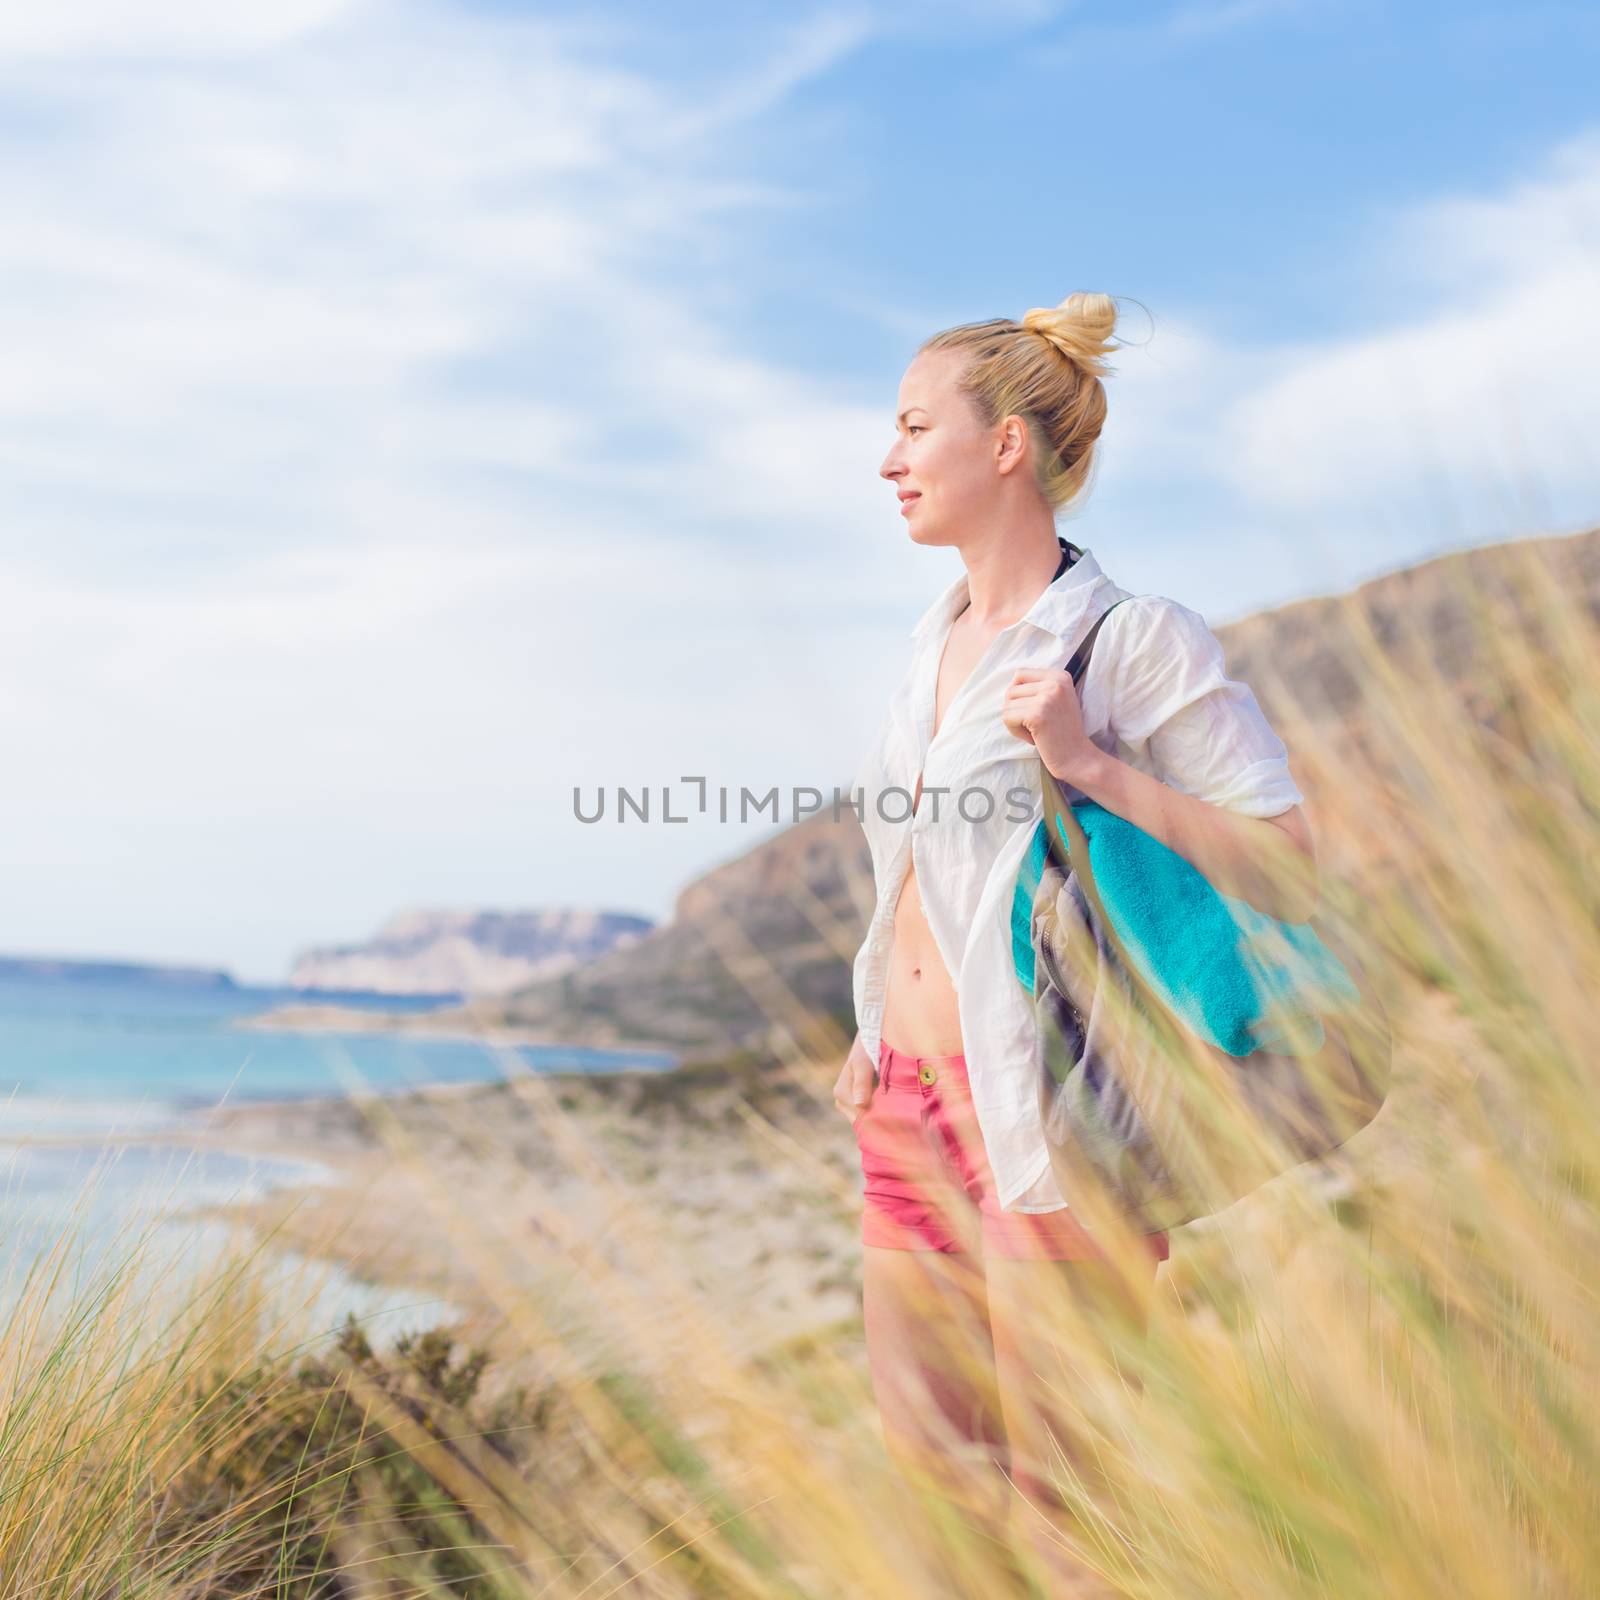 Relaxed woman on vacations in white loose shirt carrying beach bag and towel, enjoying beautiful coastline view of white sandy lagoon at Balos beach, Greece.